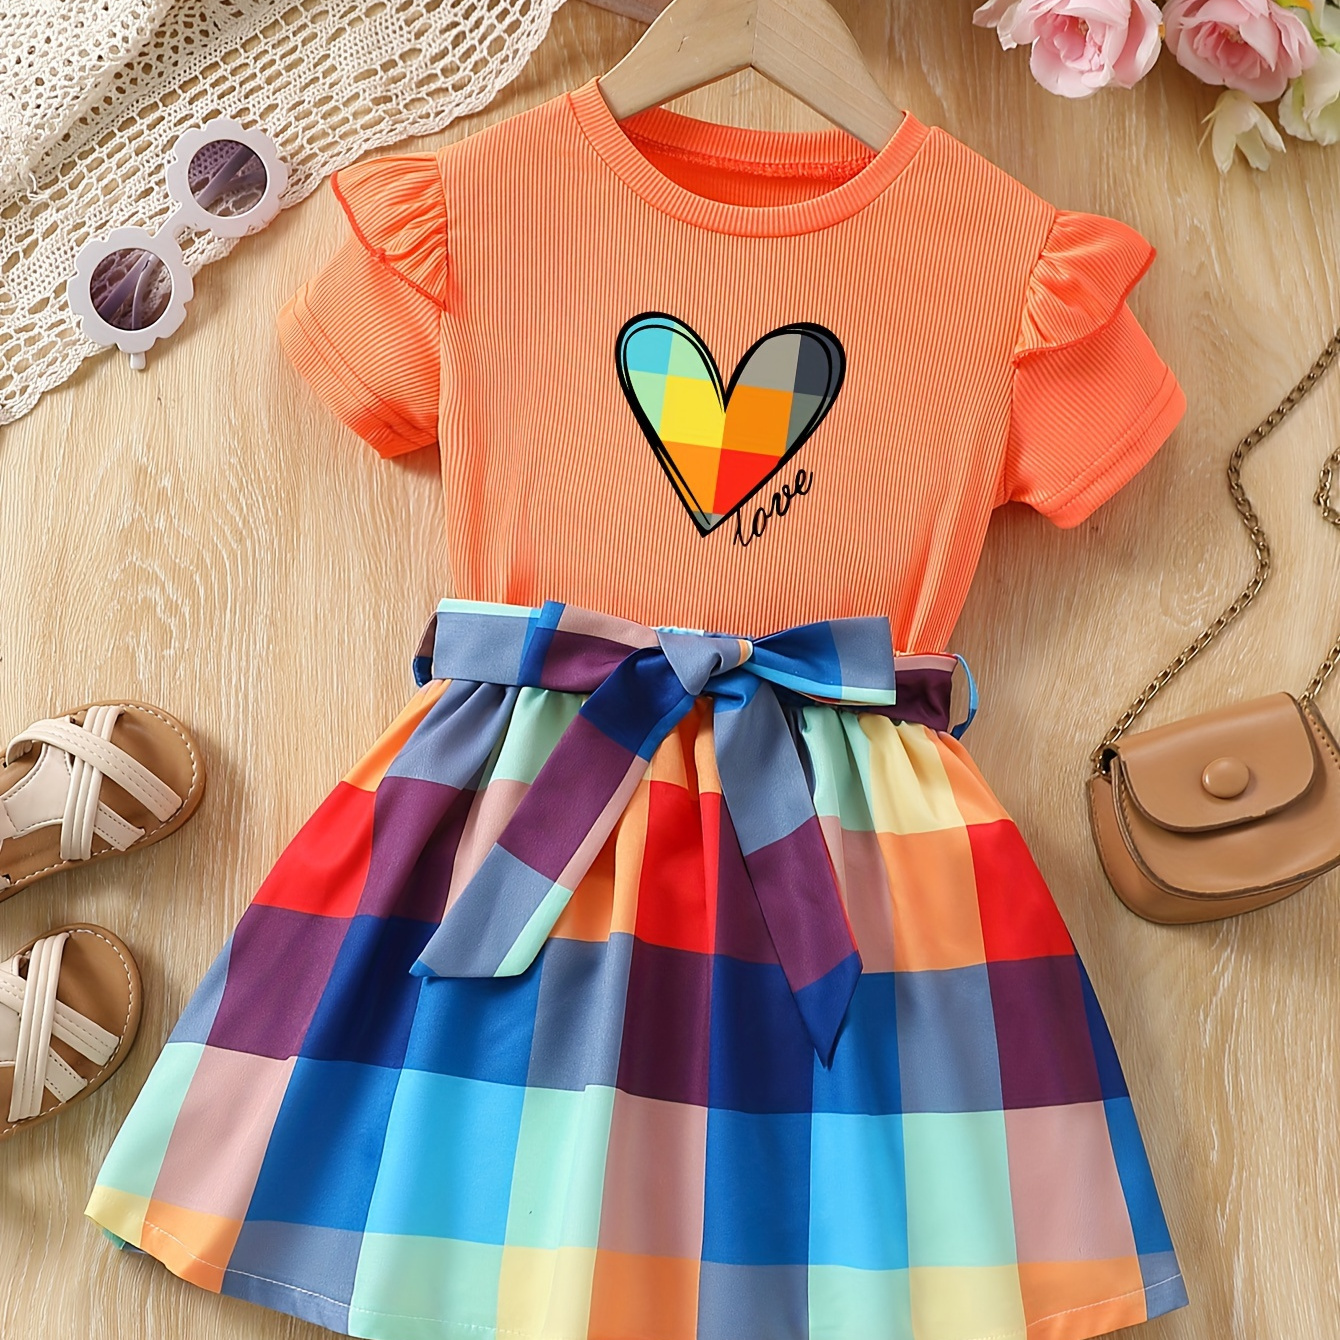 

Girl's 2pcs Multicolored Plaid Heart Print Outfit, Ruffle T-shirt & Plaid Short Skirt Set, Party Street Everyday Summer Clothes